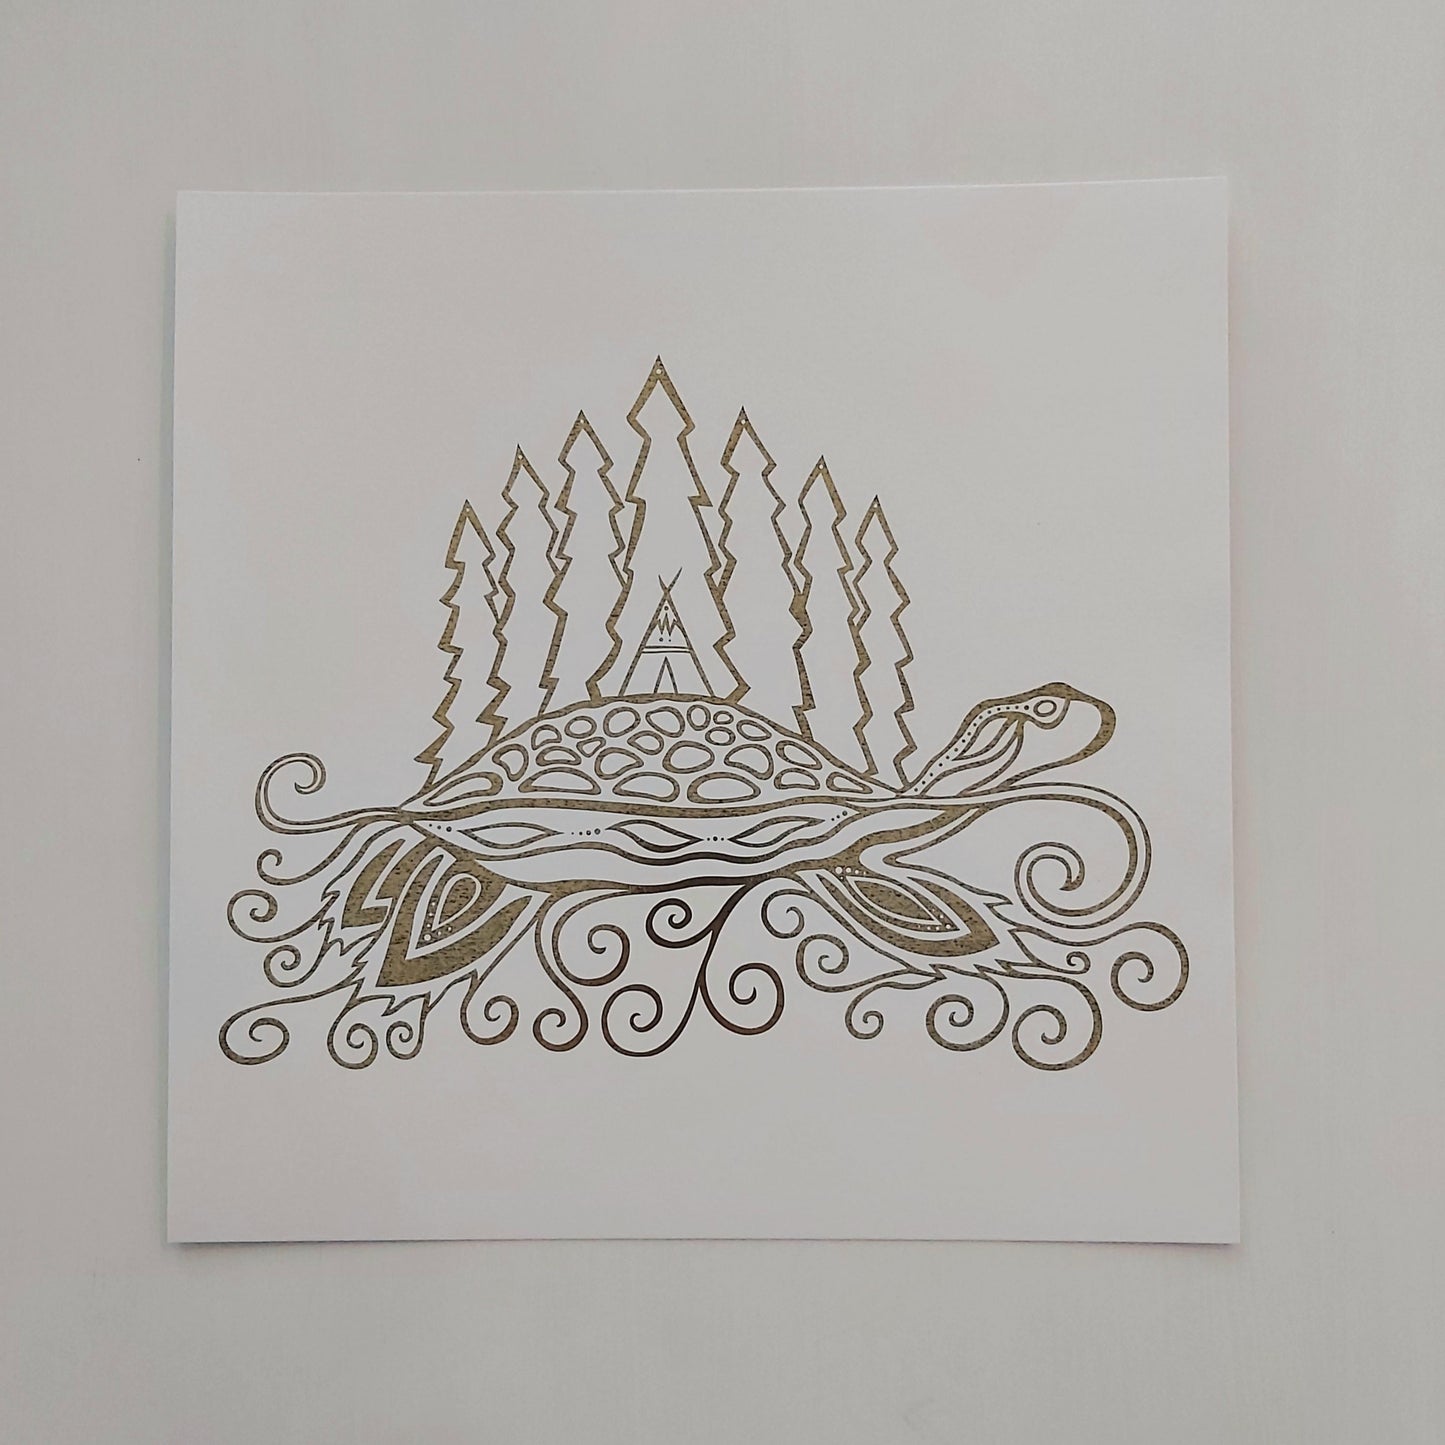 Print of Patrick Hunter's painting of a turtle carrying an island on it's back through water, gold leaf on white, woodland art style.